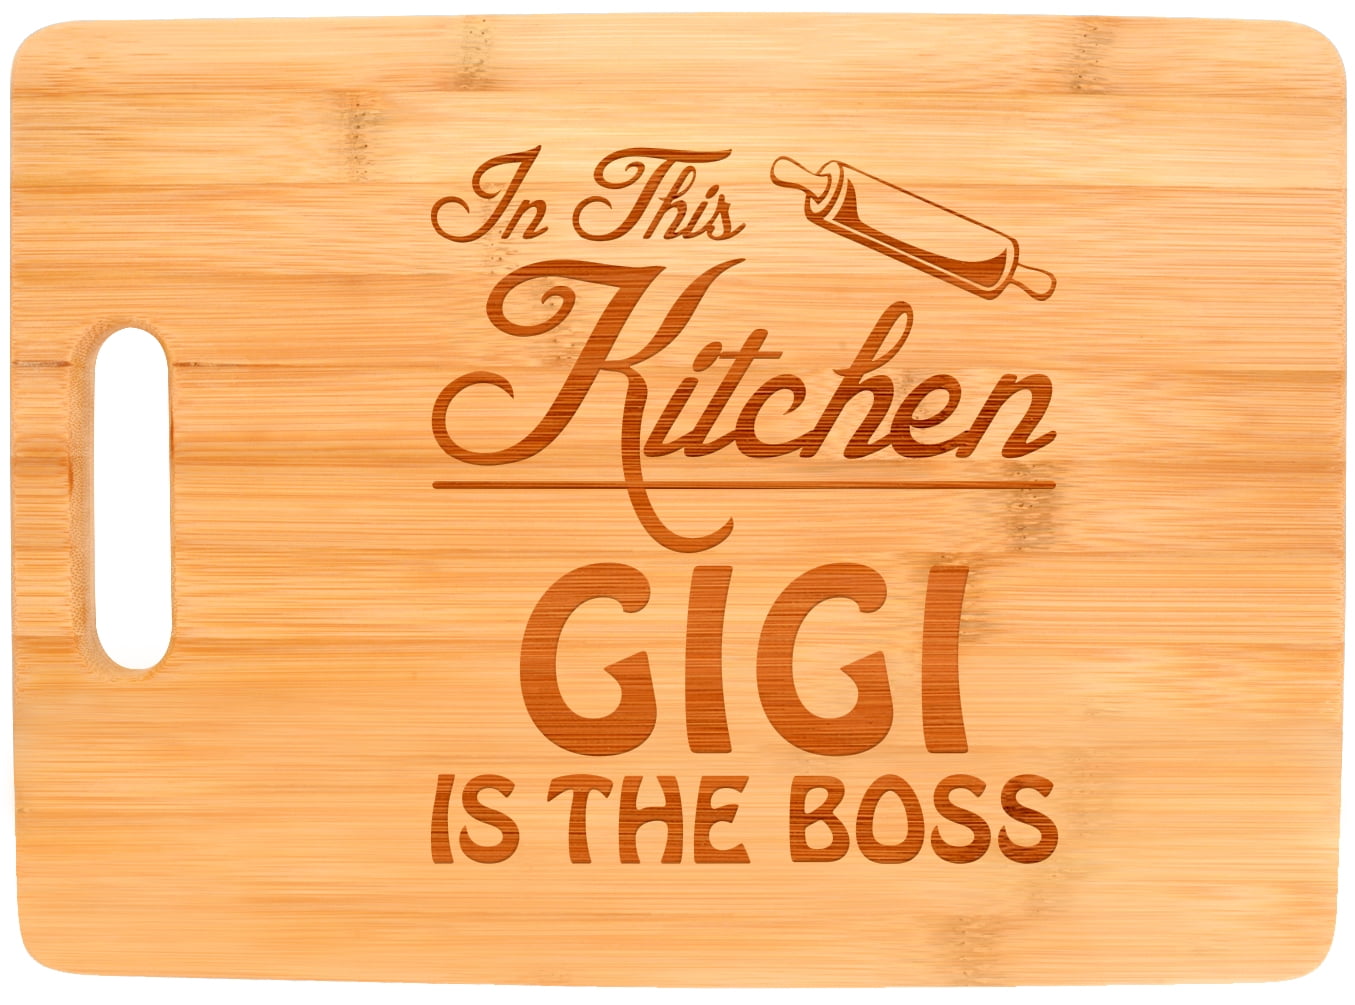 Cutting Board - Home is Where Your Mom Is – Ginger Squared